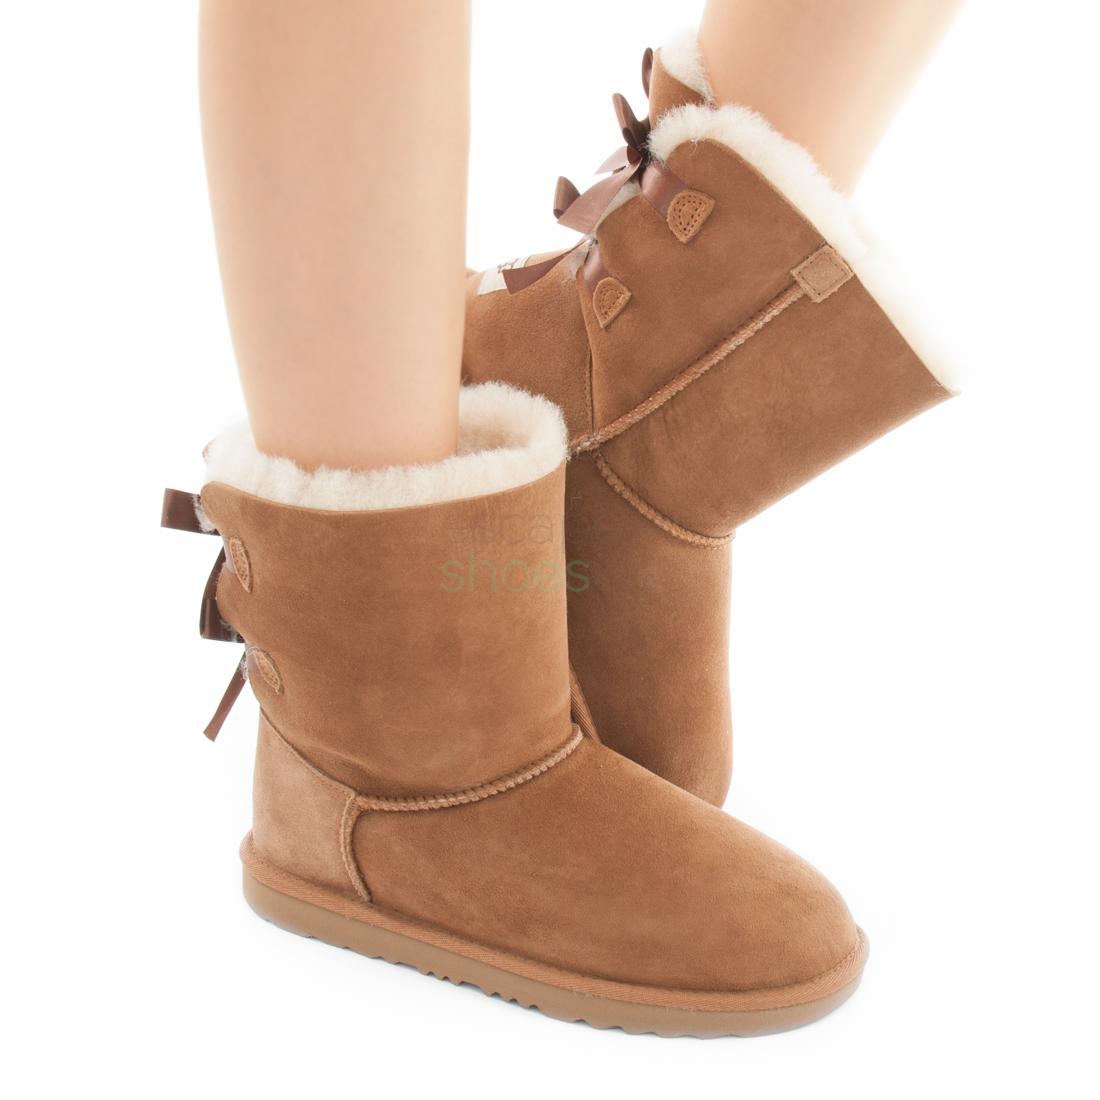 UGG Bailey Bow II Calf Boots Chestnut Suede - Women's Ankle Boots